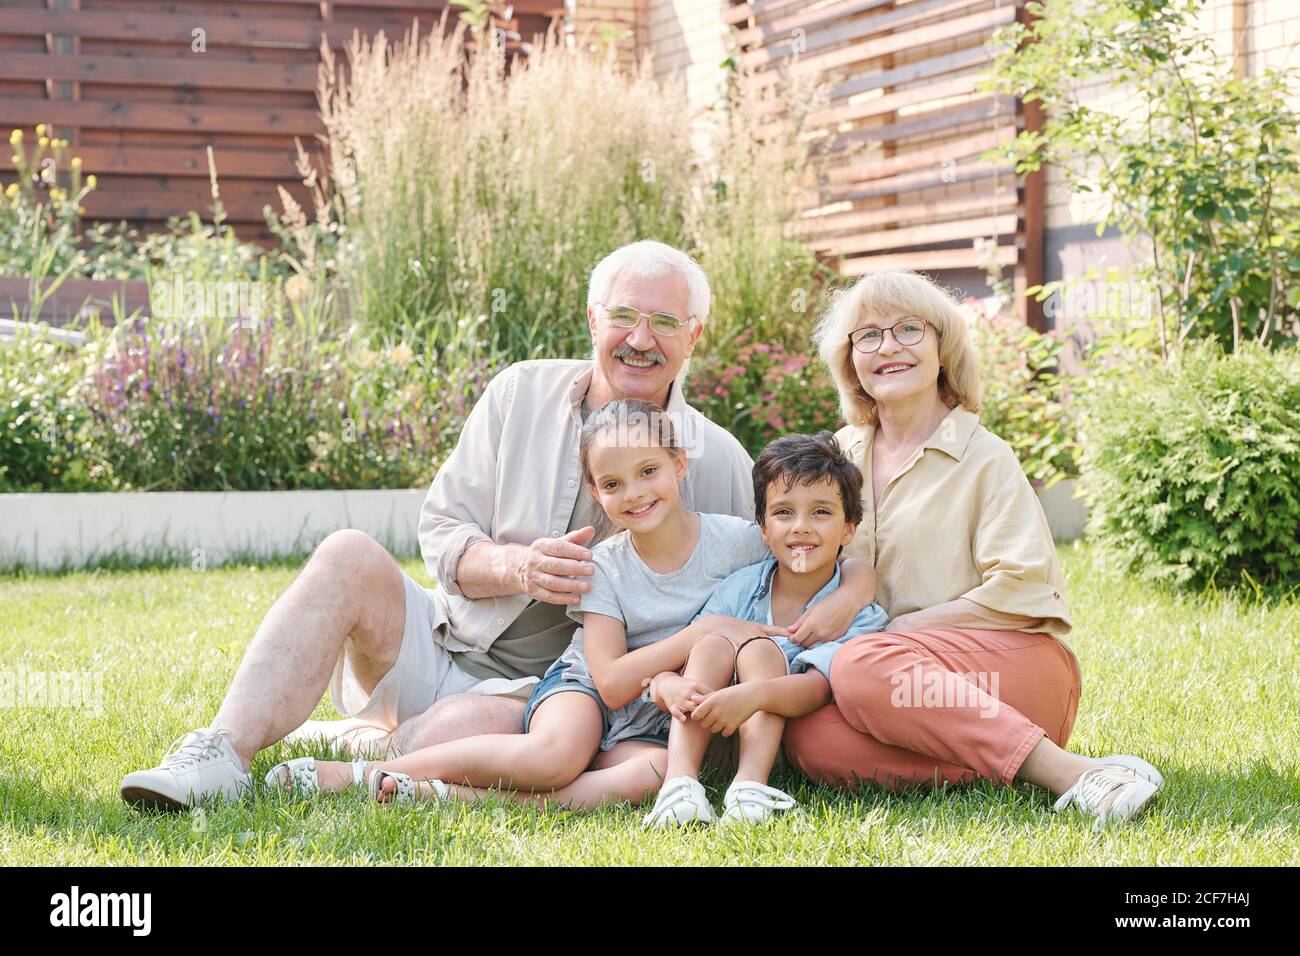 Group portrait of cheerful grandma, grandpa and two grandchildren sitting together on lawn in backyard looking at camera smiling Stock Photo